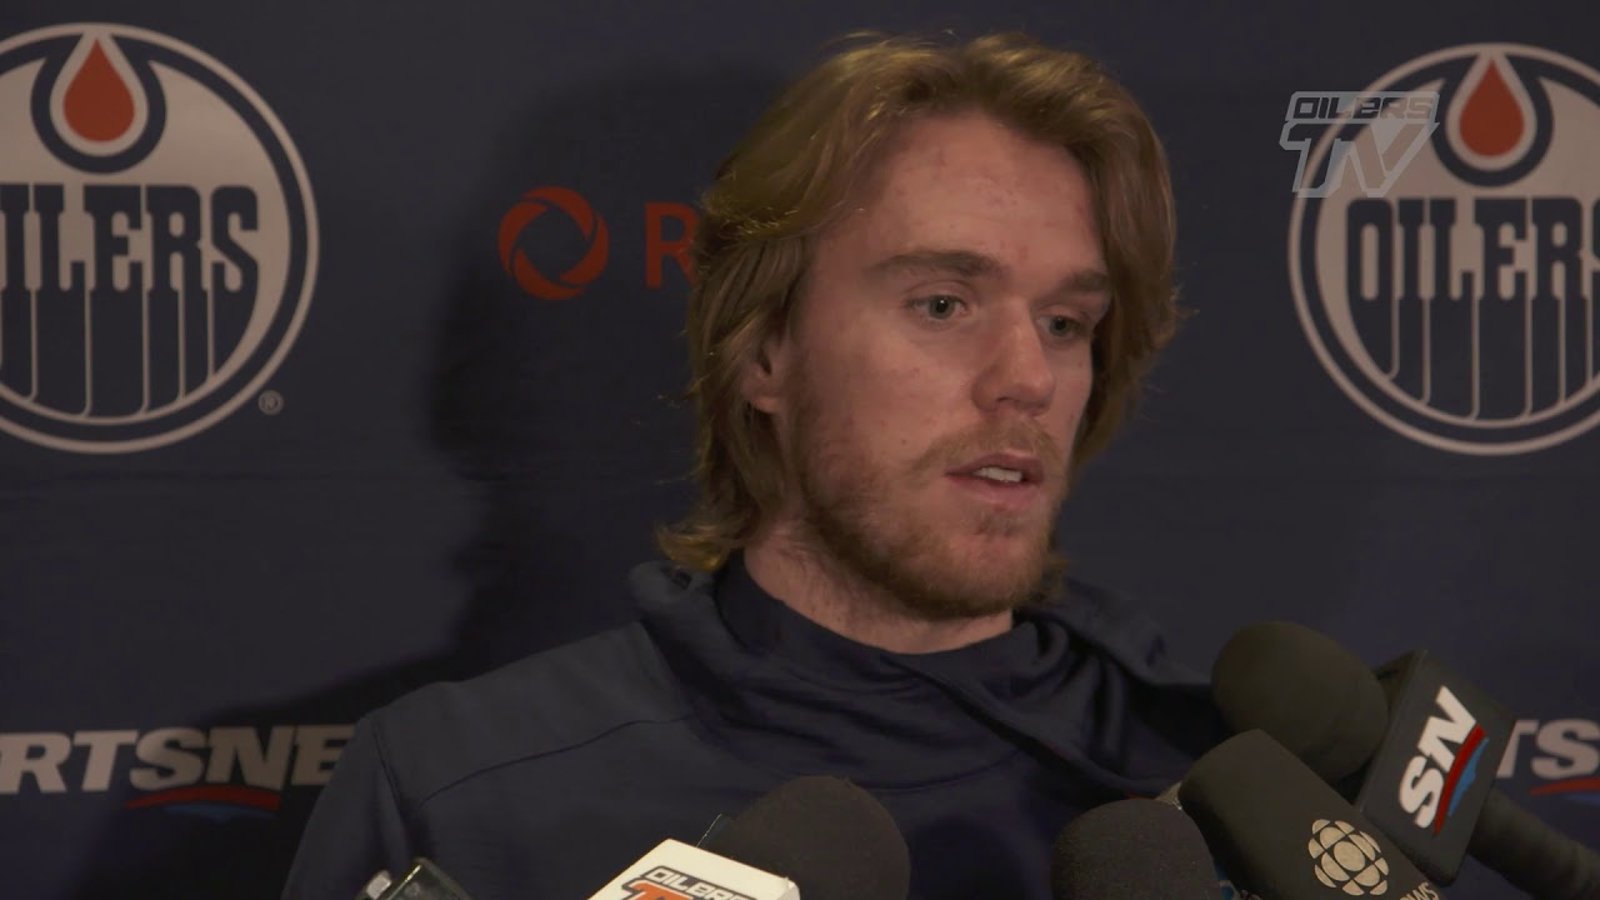 Connor McDavid shares message to fans about difficult offseason